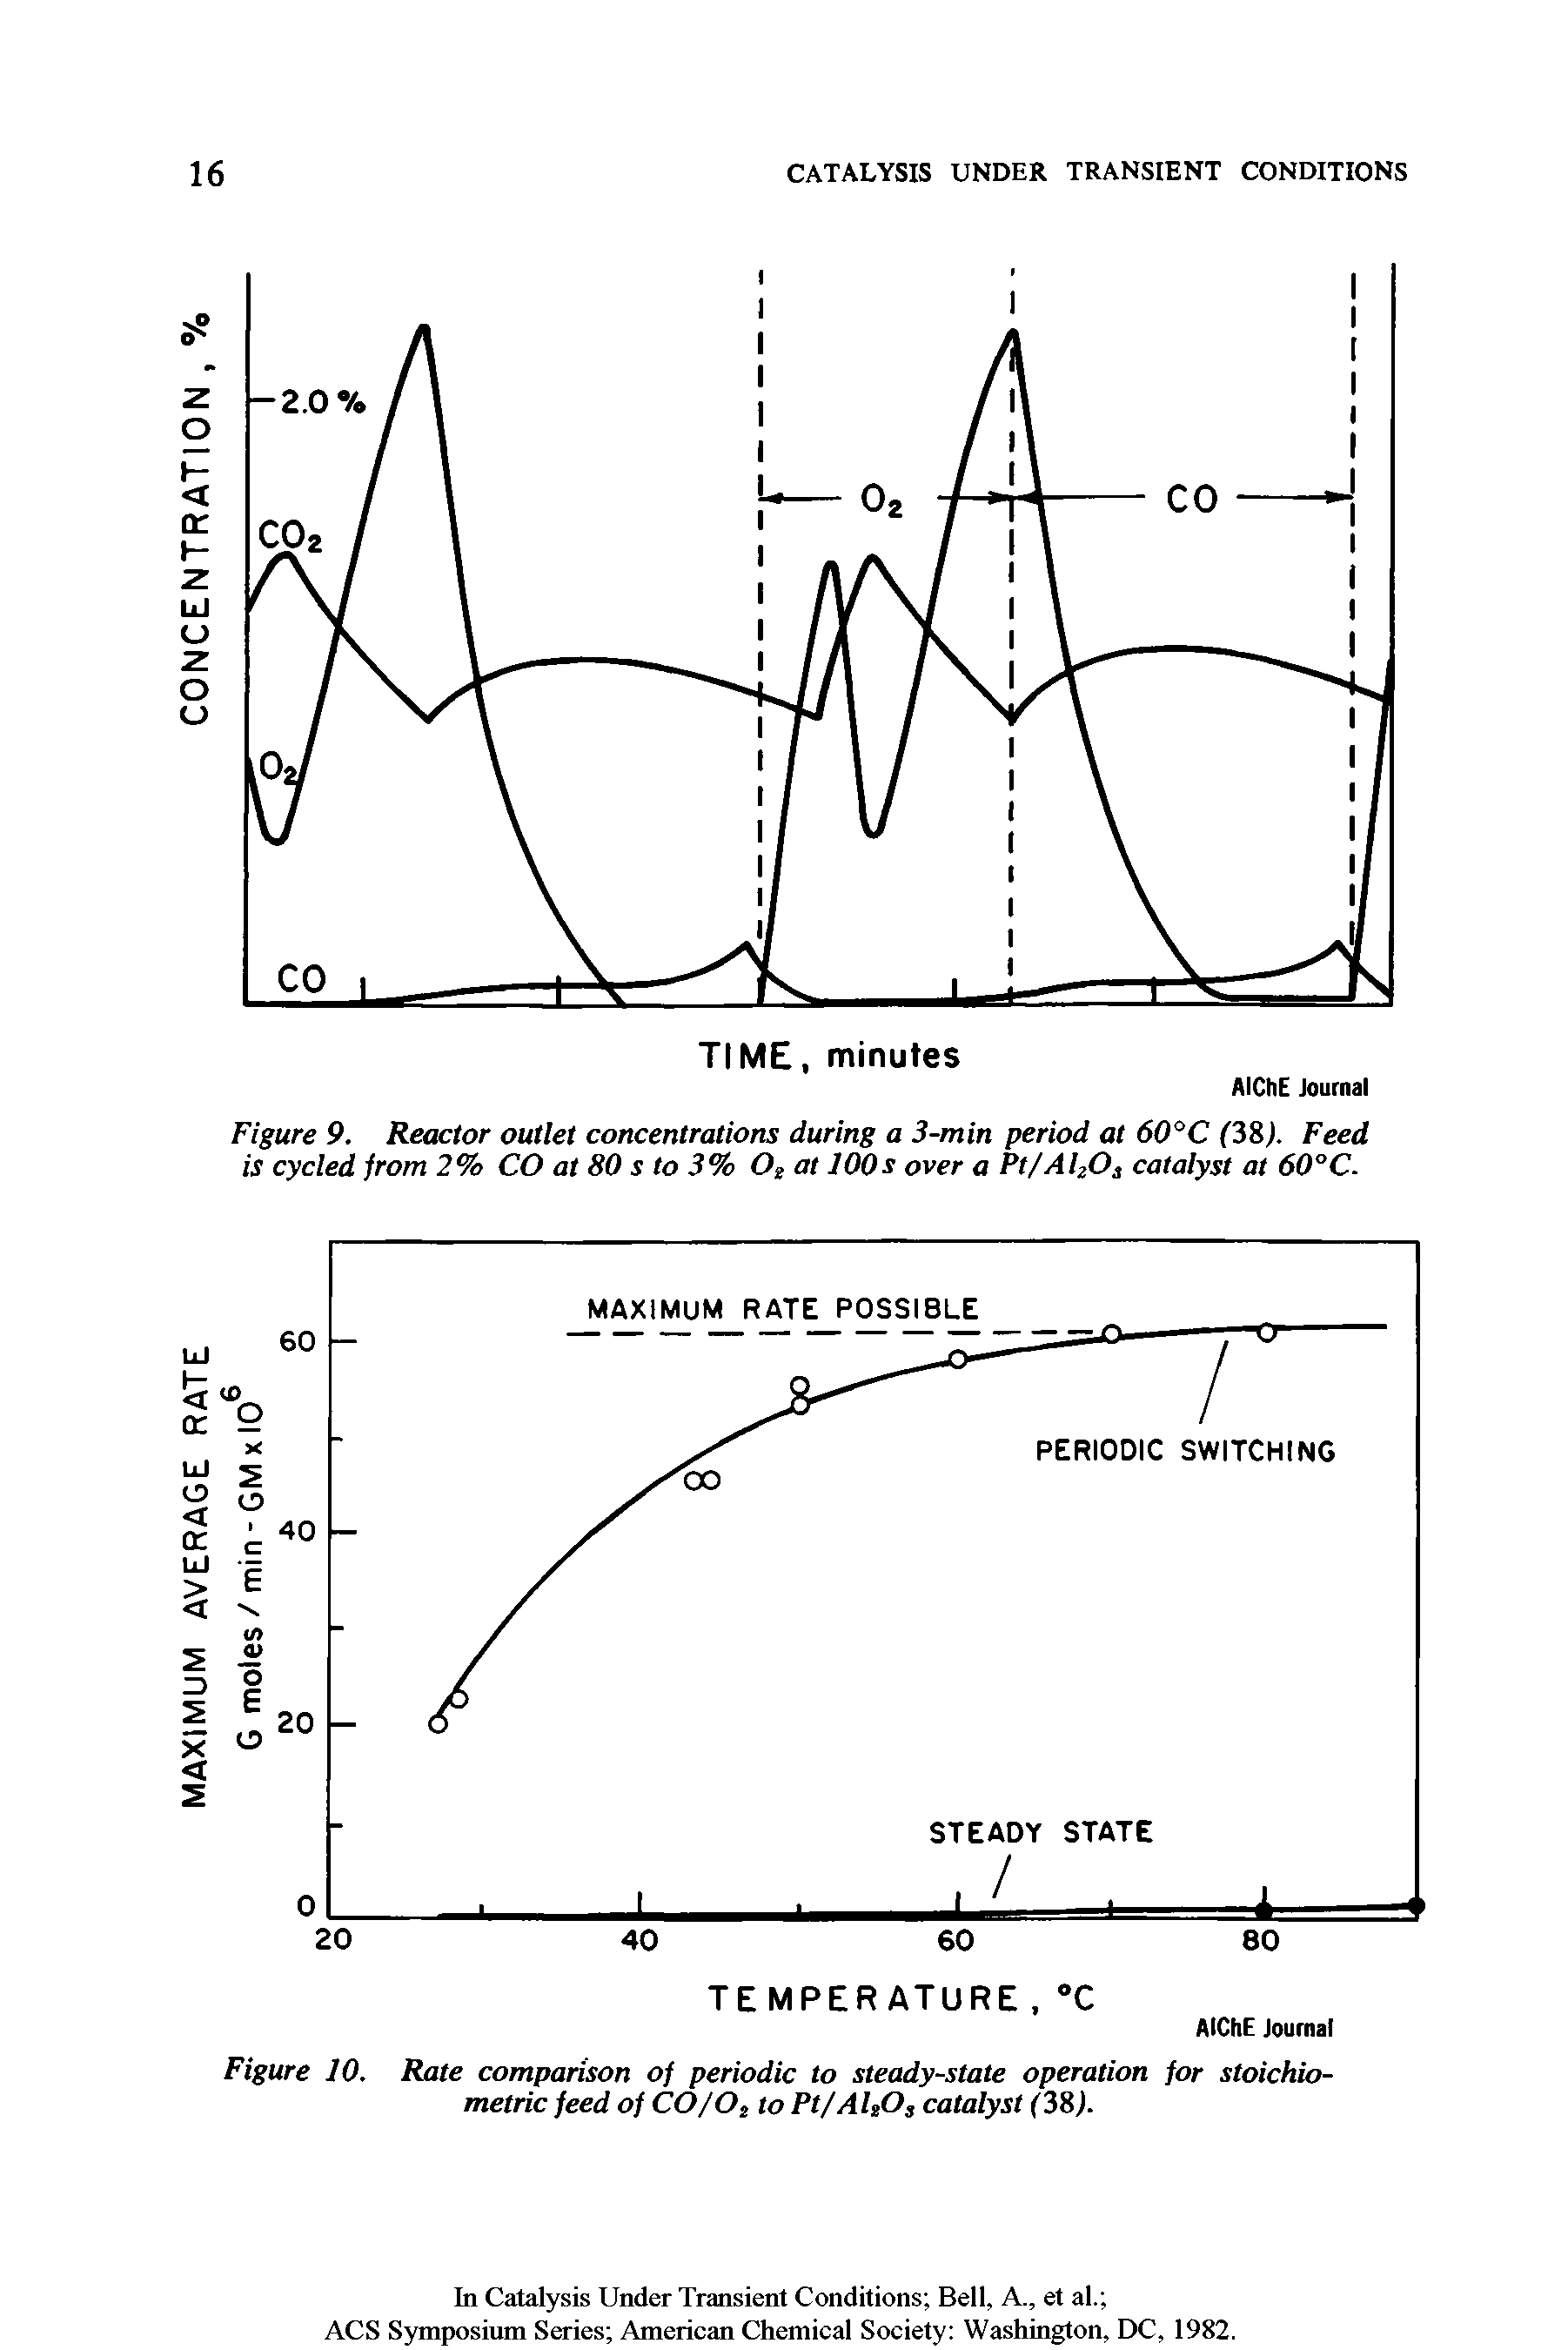 Figure 10. Rate comparison of periodic to steady-state operation for stoichiometric feed of C0/02 to Pt/AUO, catalyst (38,).